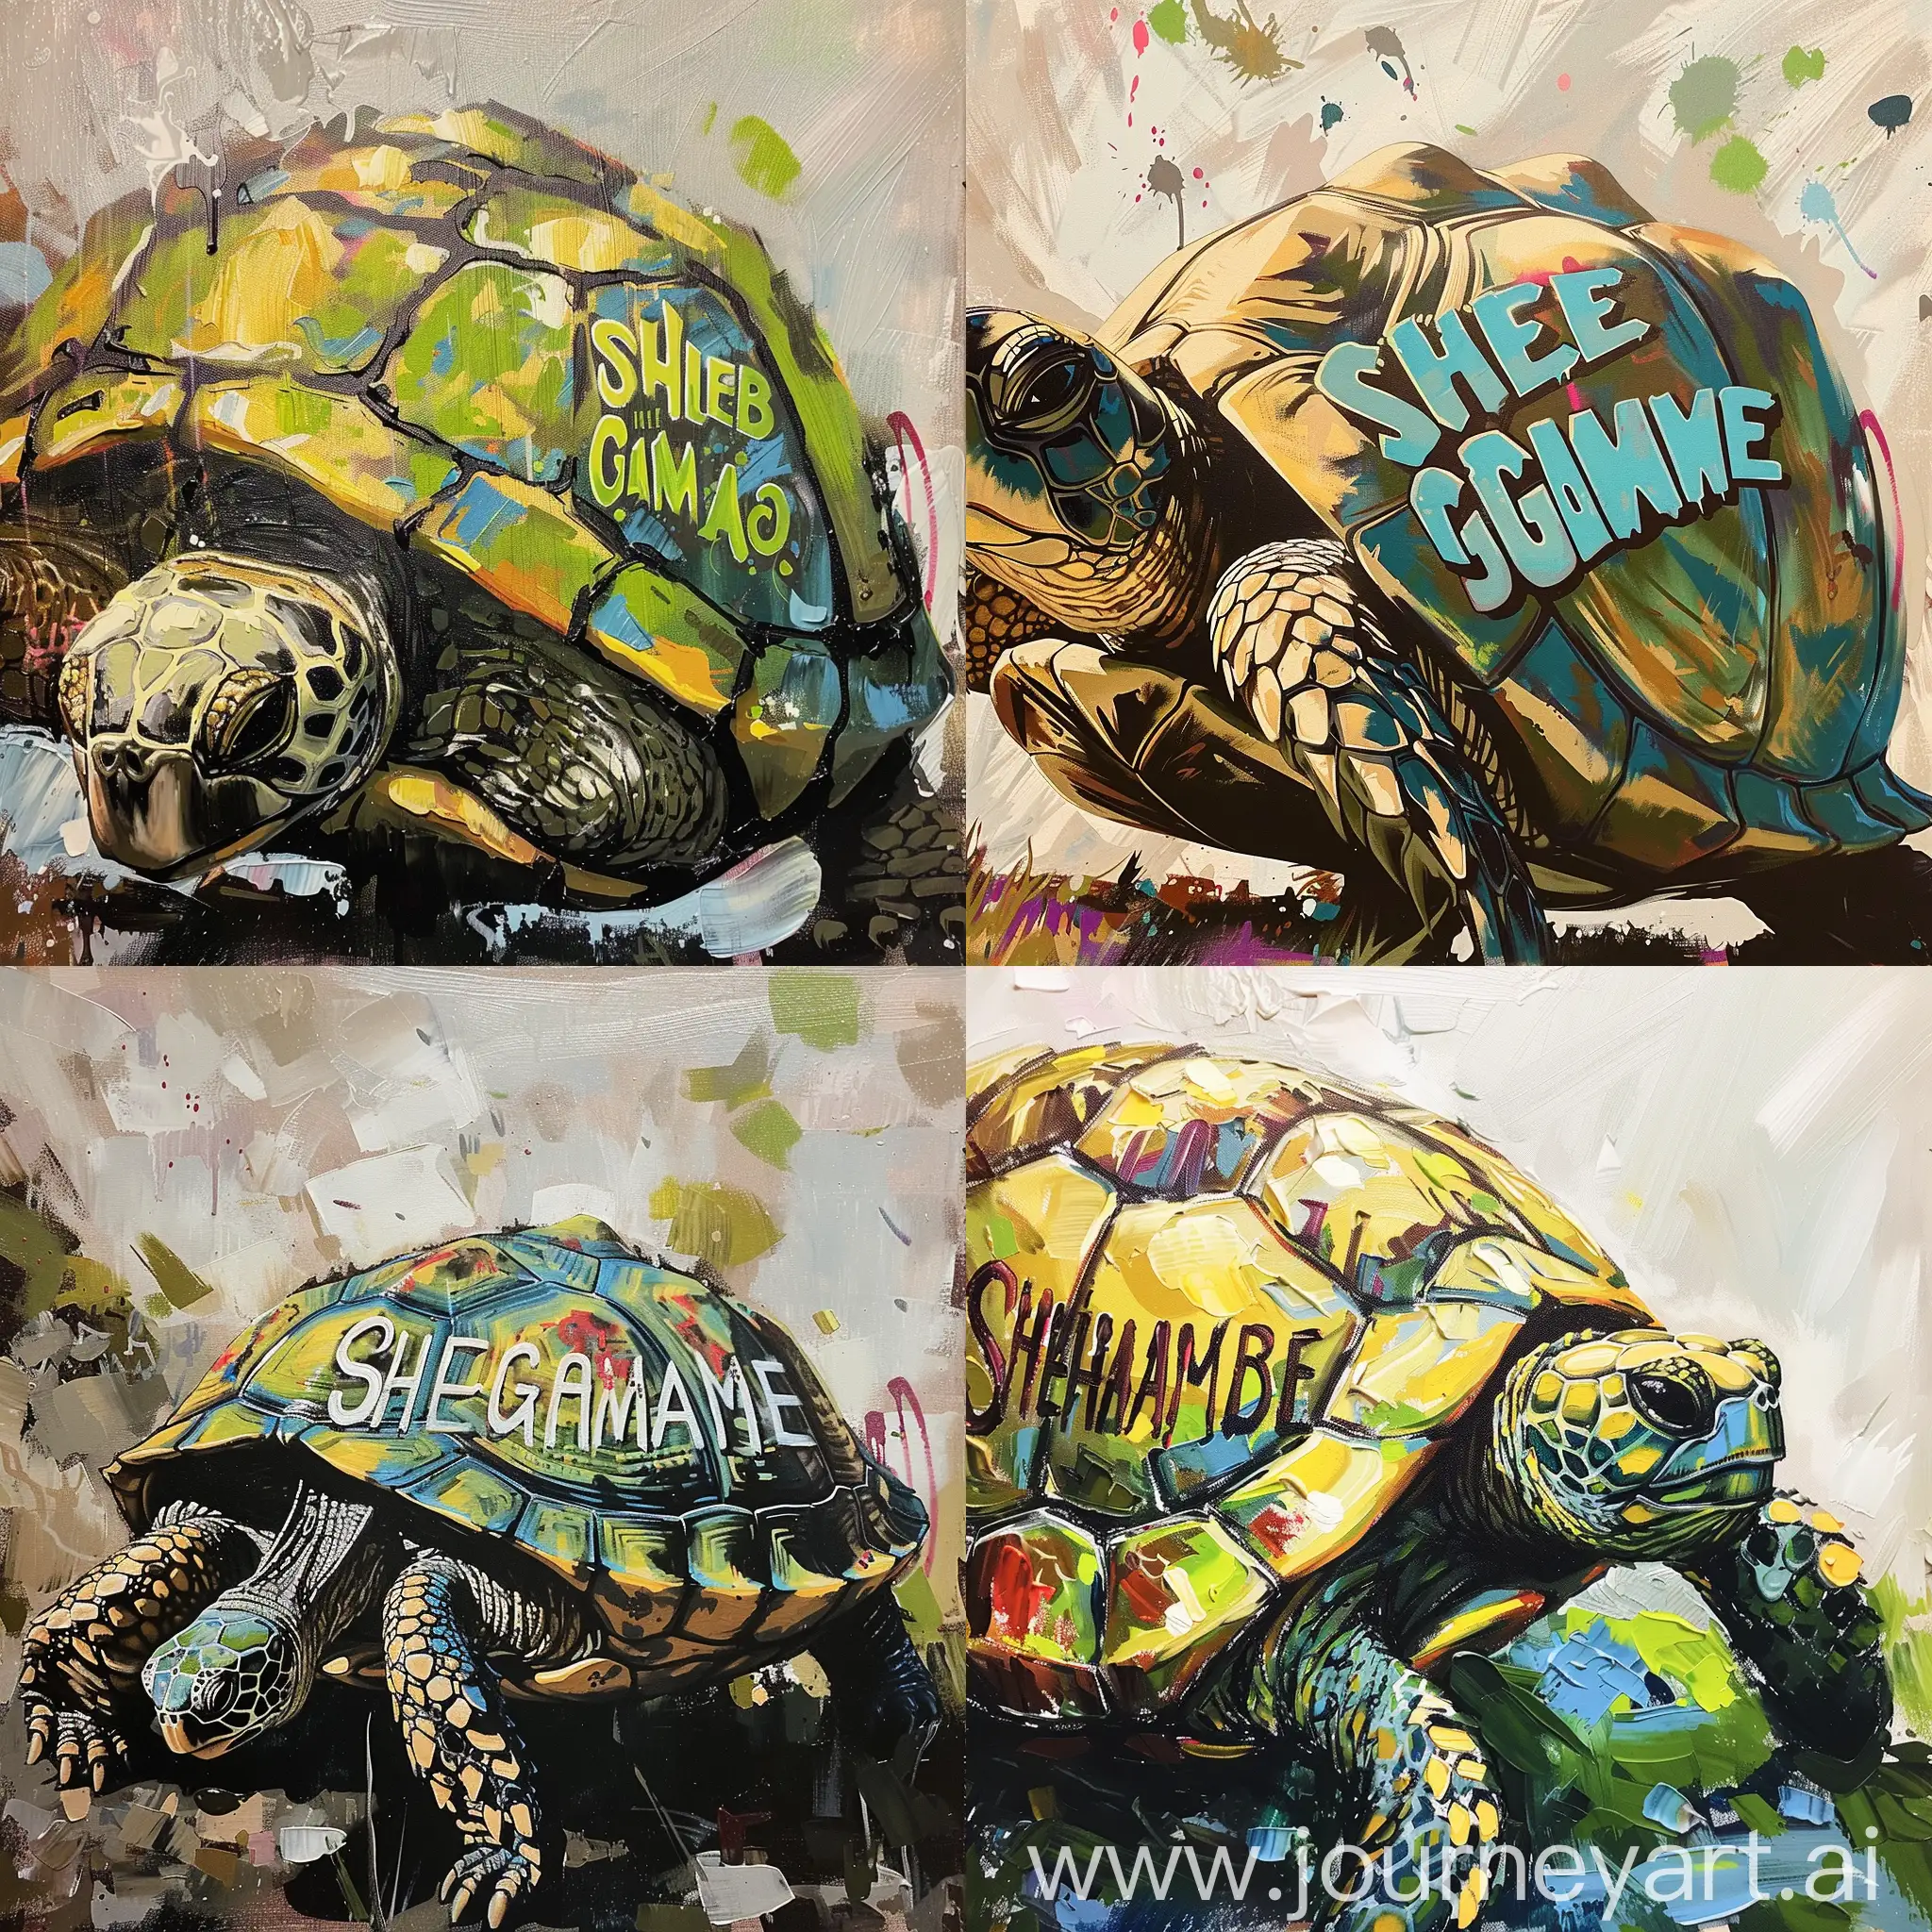 Vibrant-Turtle-Shell-Game-Art-with-Graffiti-Style